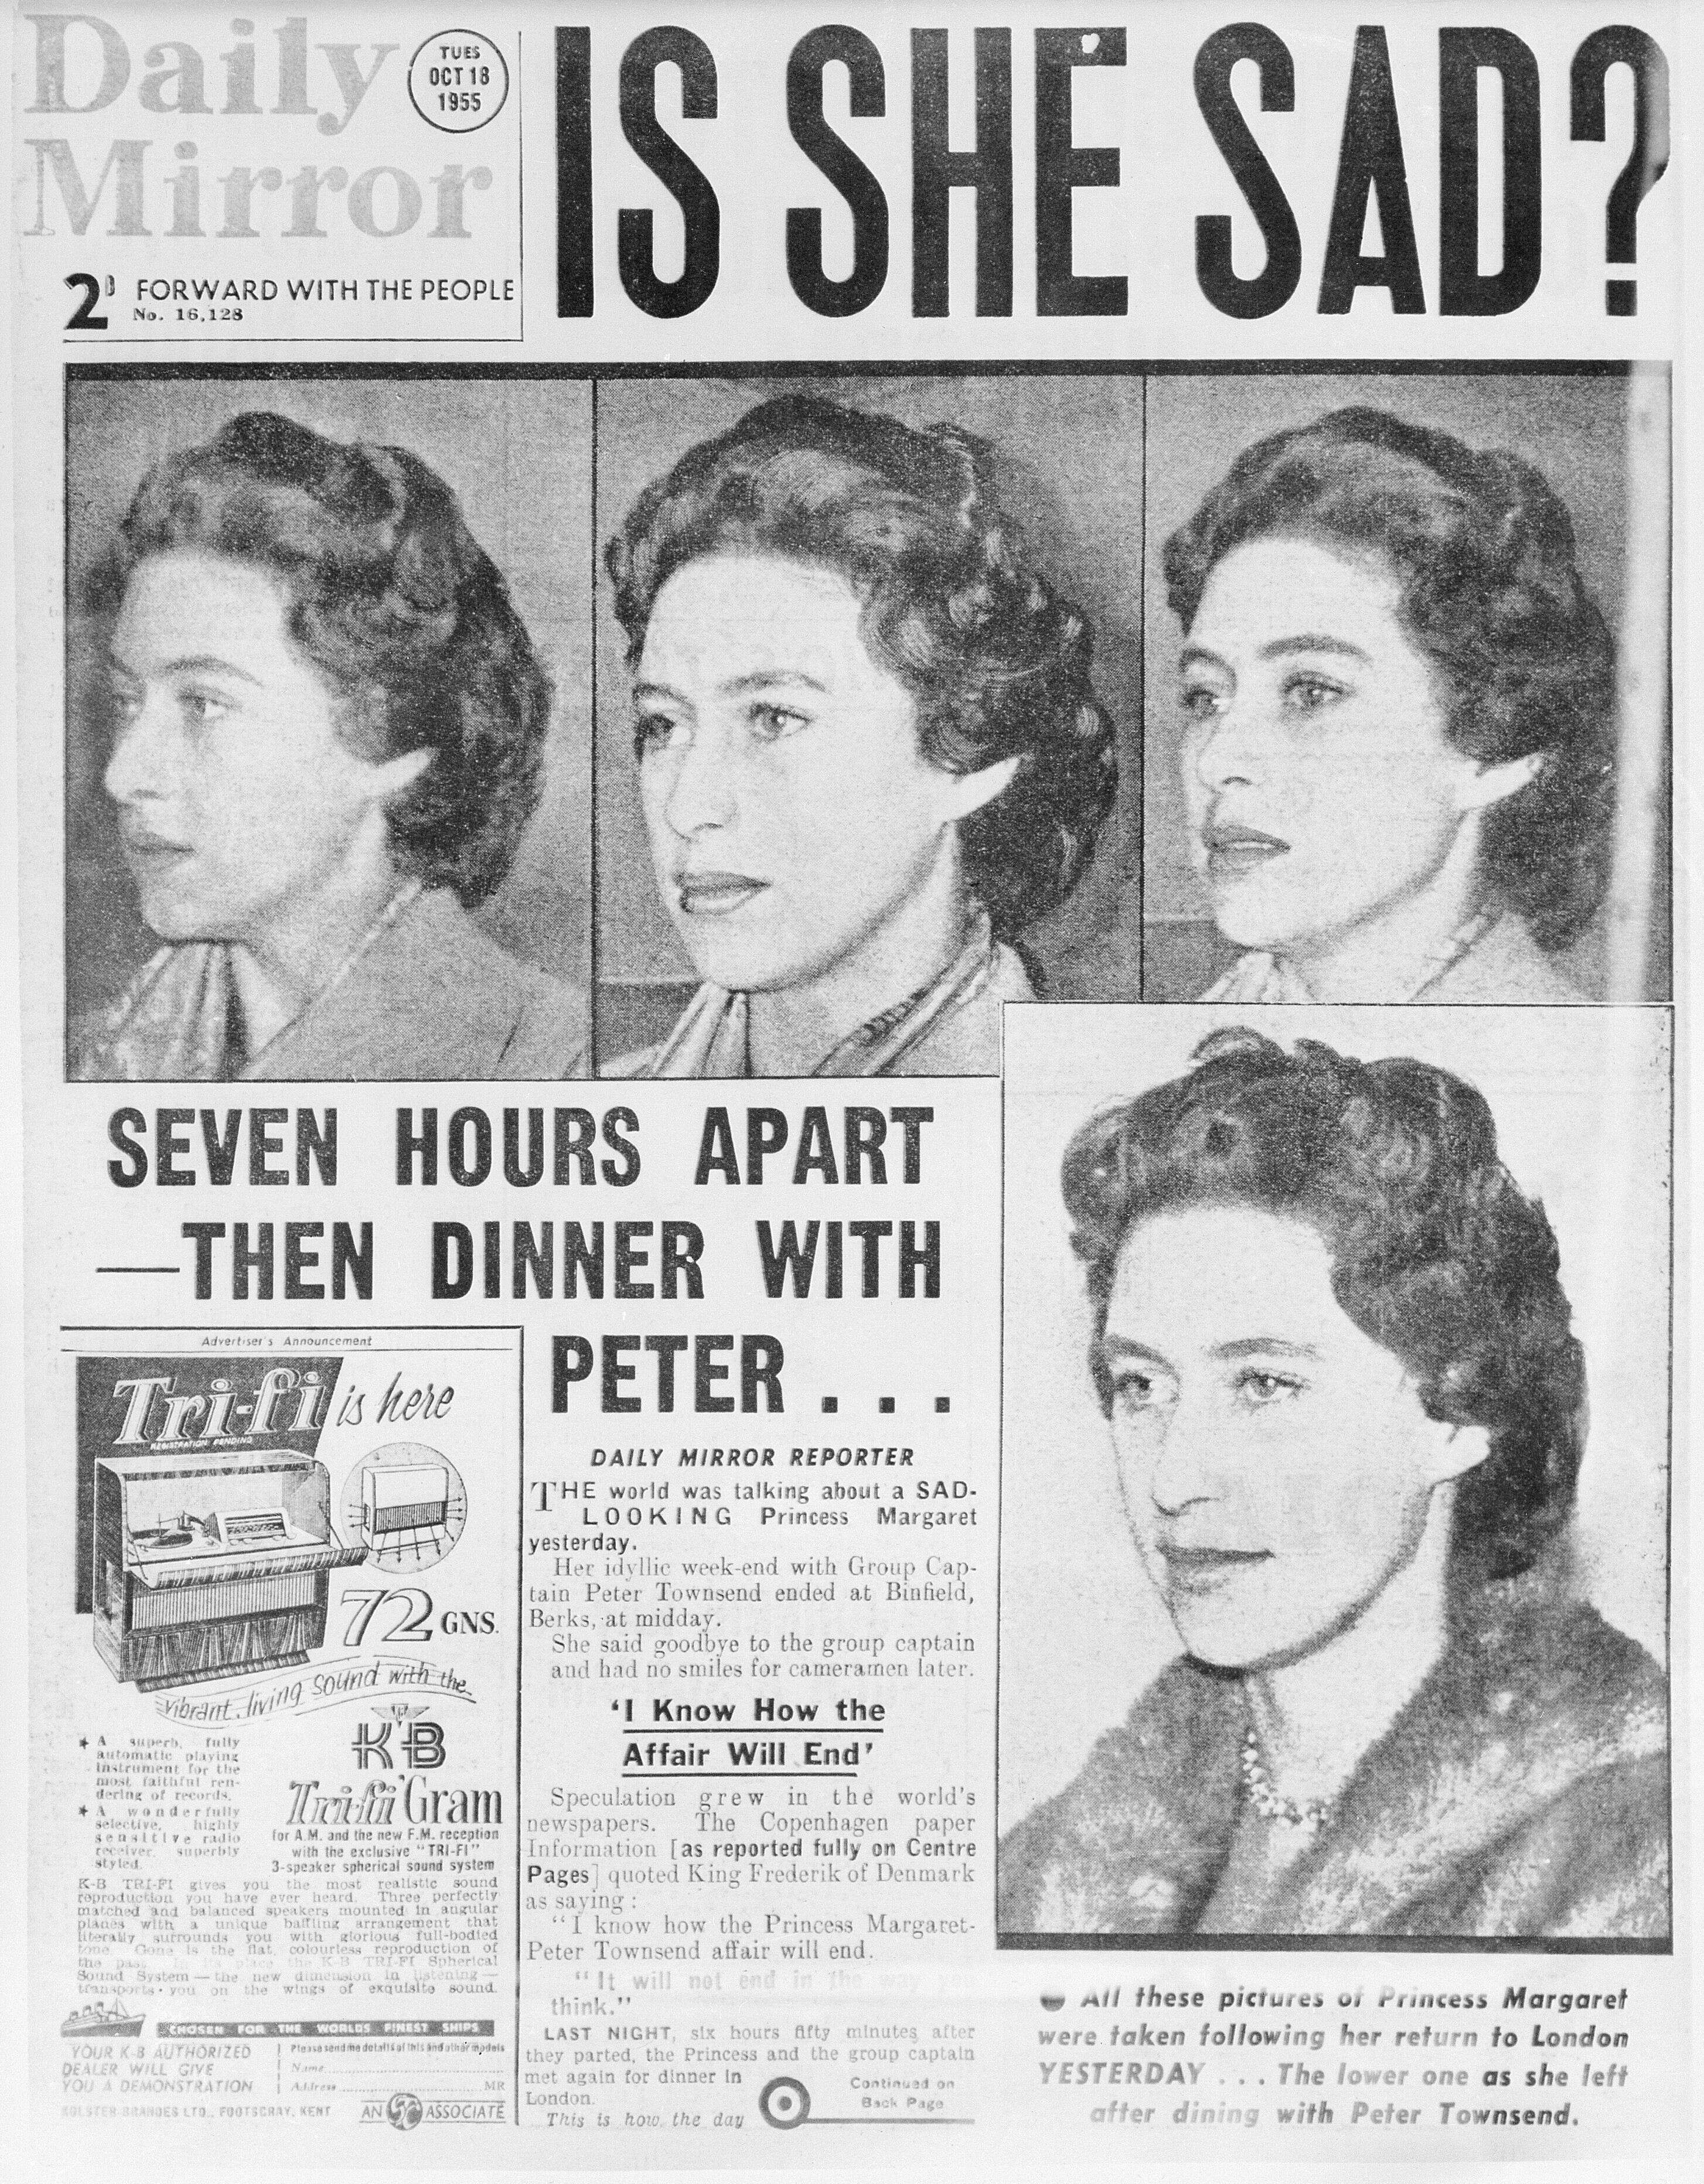 Princess Margaret's doomed romance with Group Captain Peter Townsend was played out in the tabloids